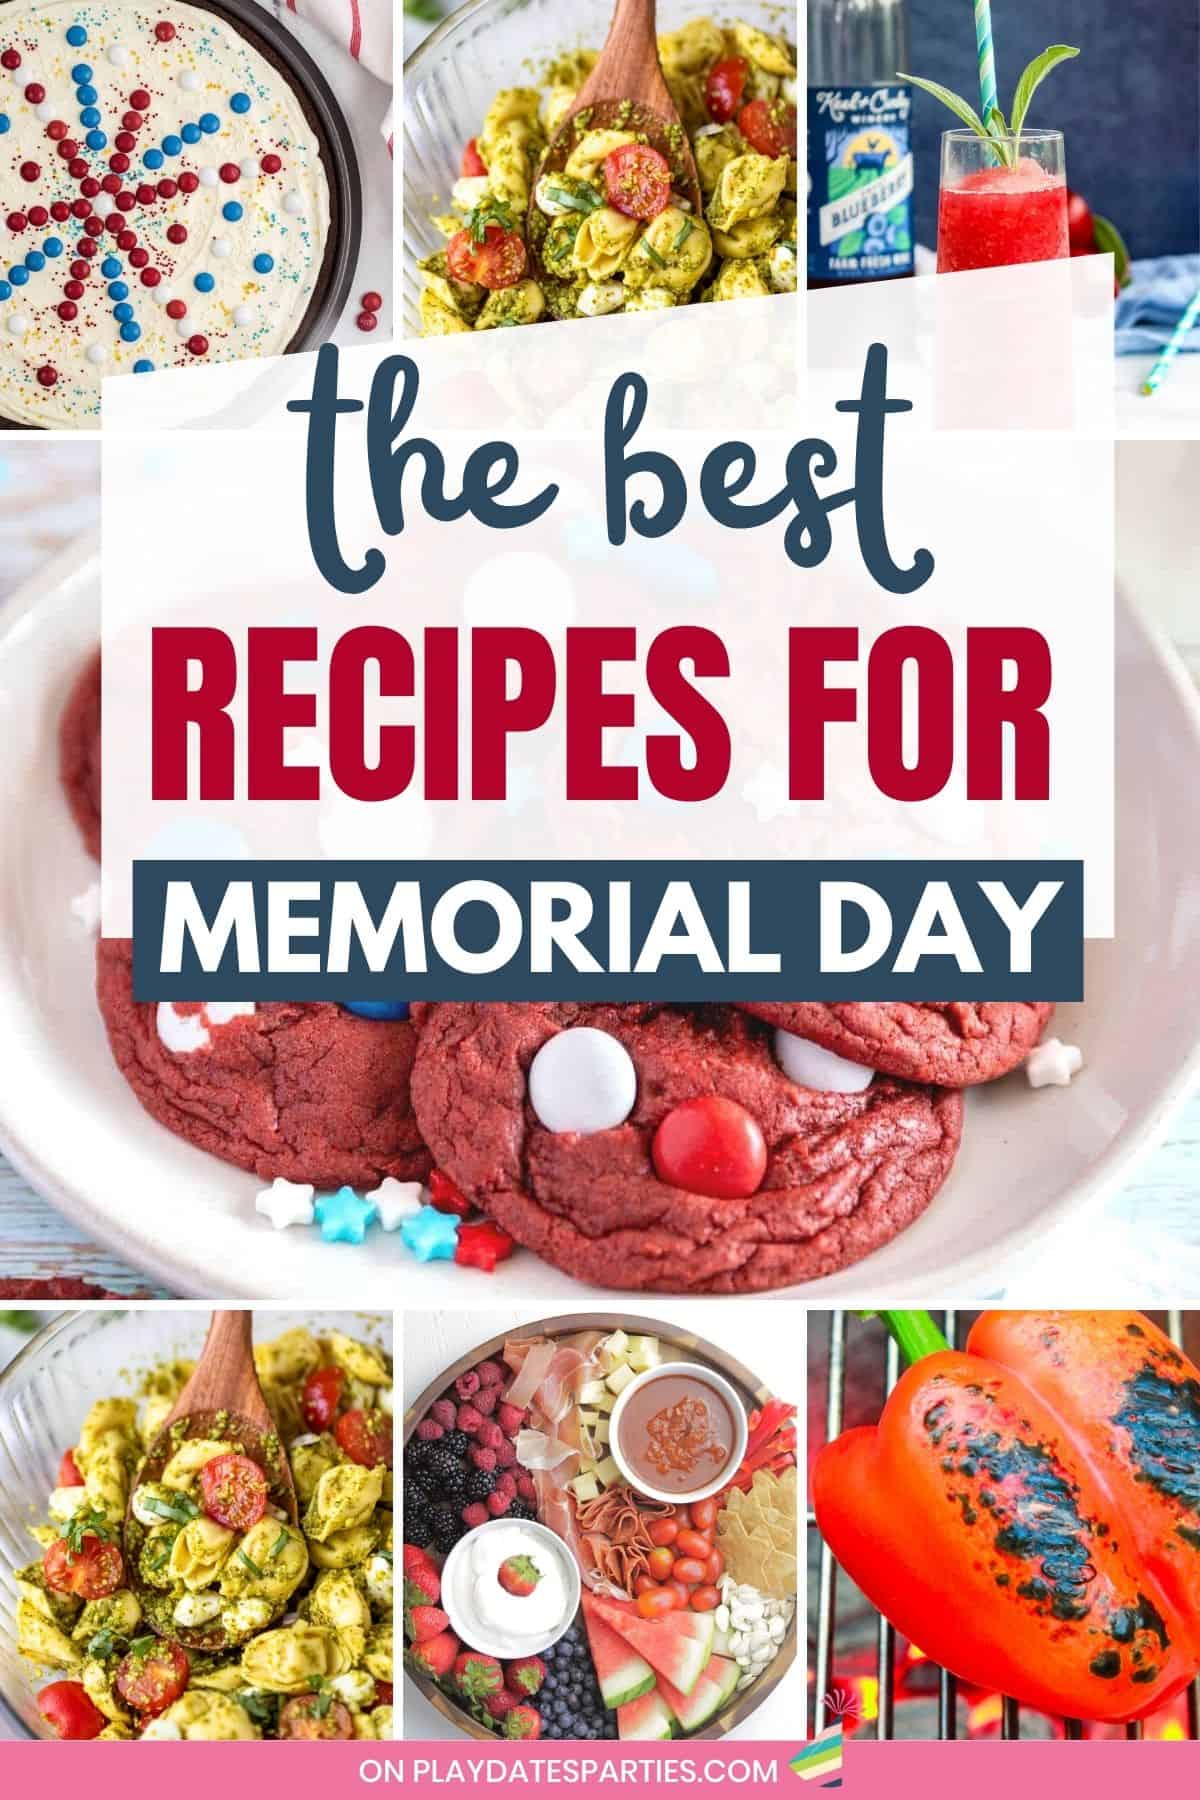 75 red, white, and blue food ideas for memorial day.